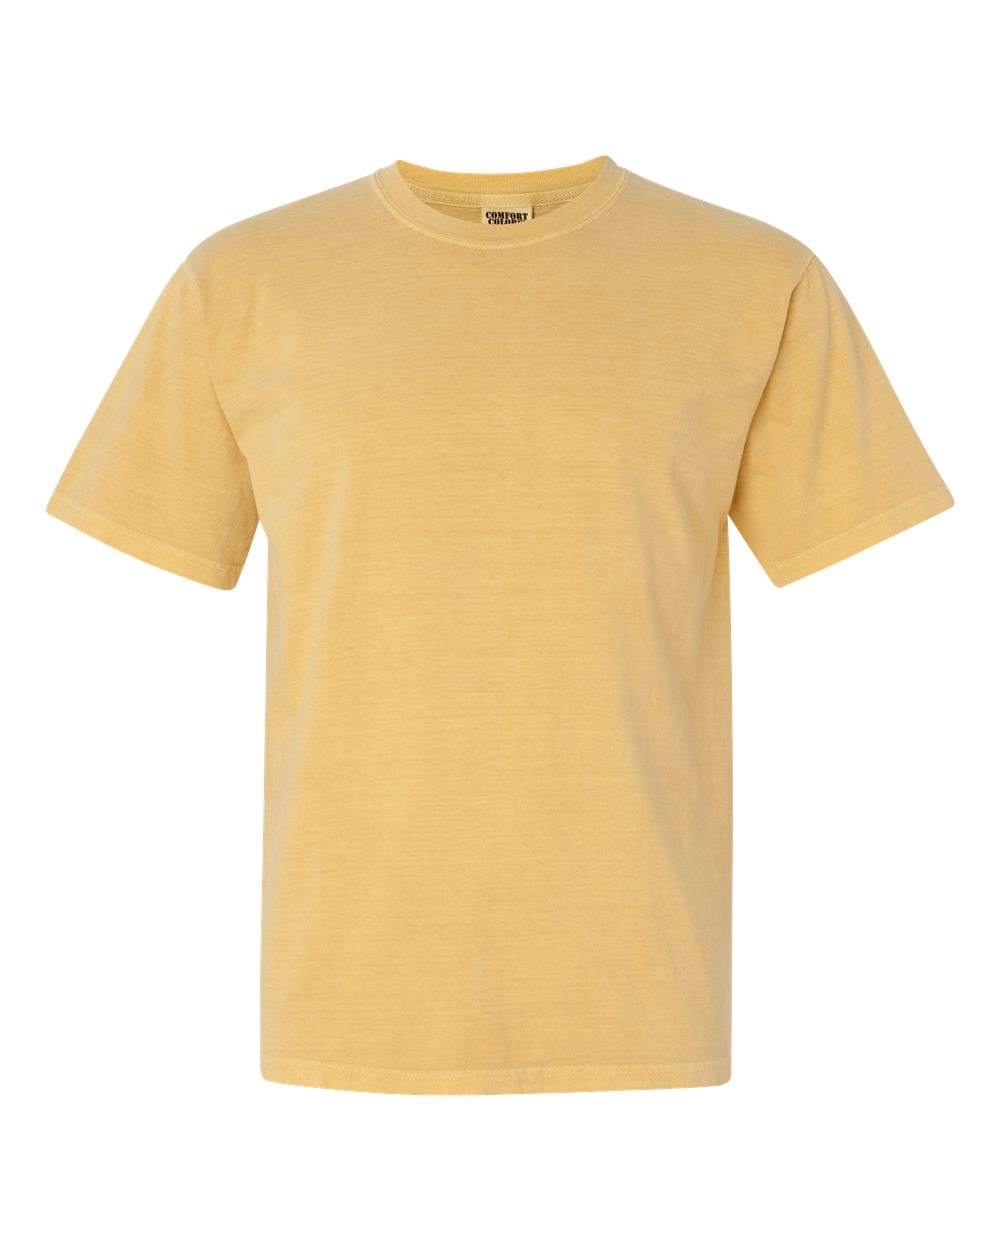 Comfort Colors Garment-Dyed Tee (1717) in Mustard